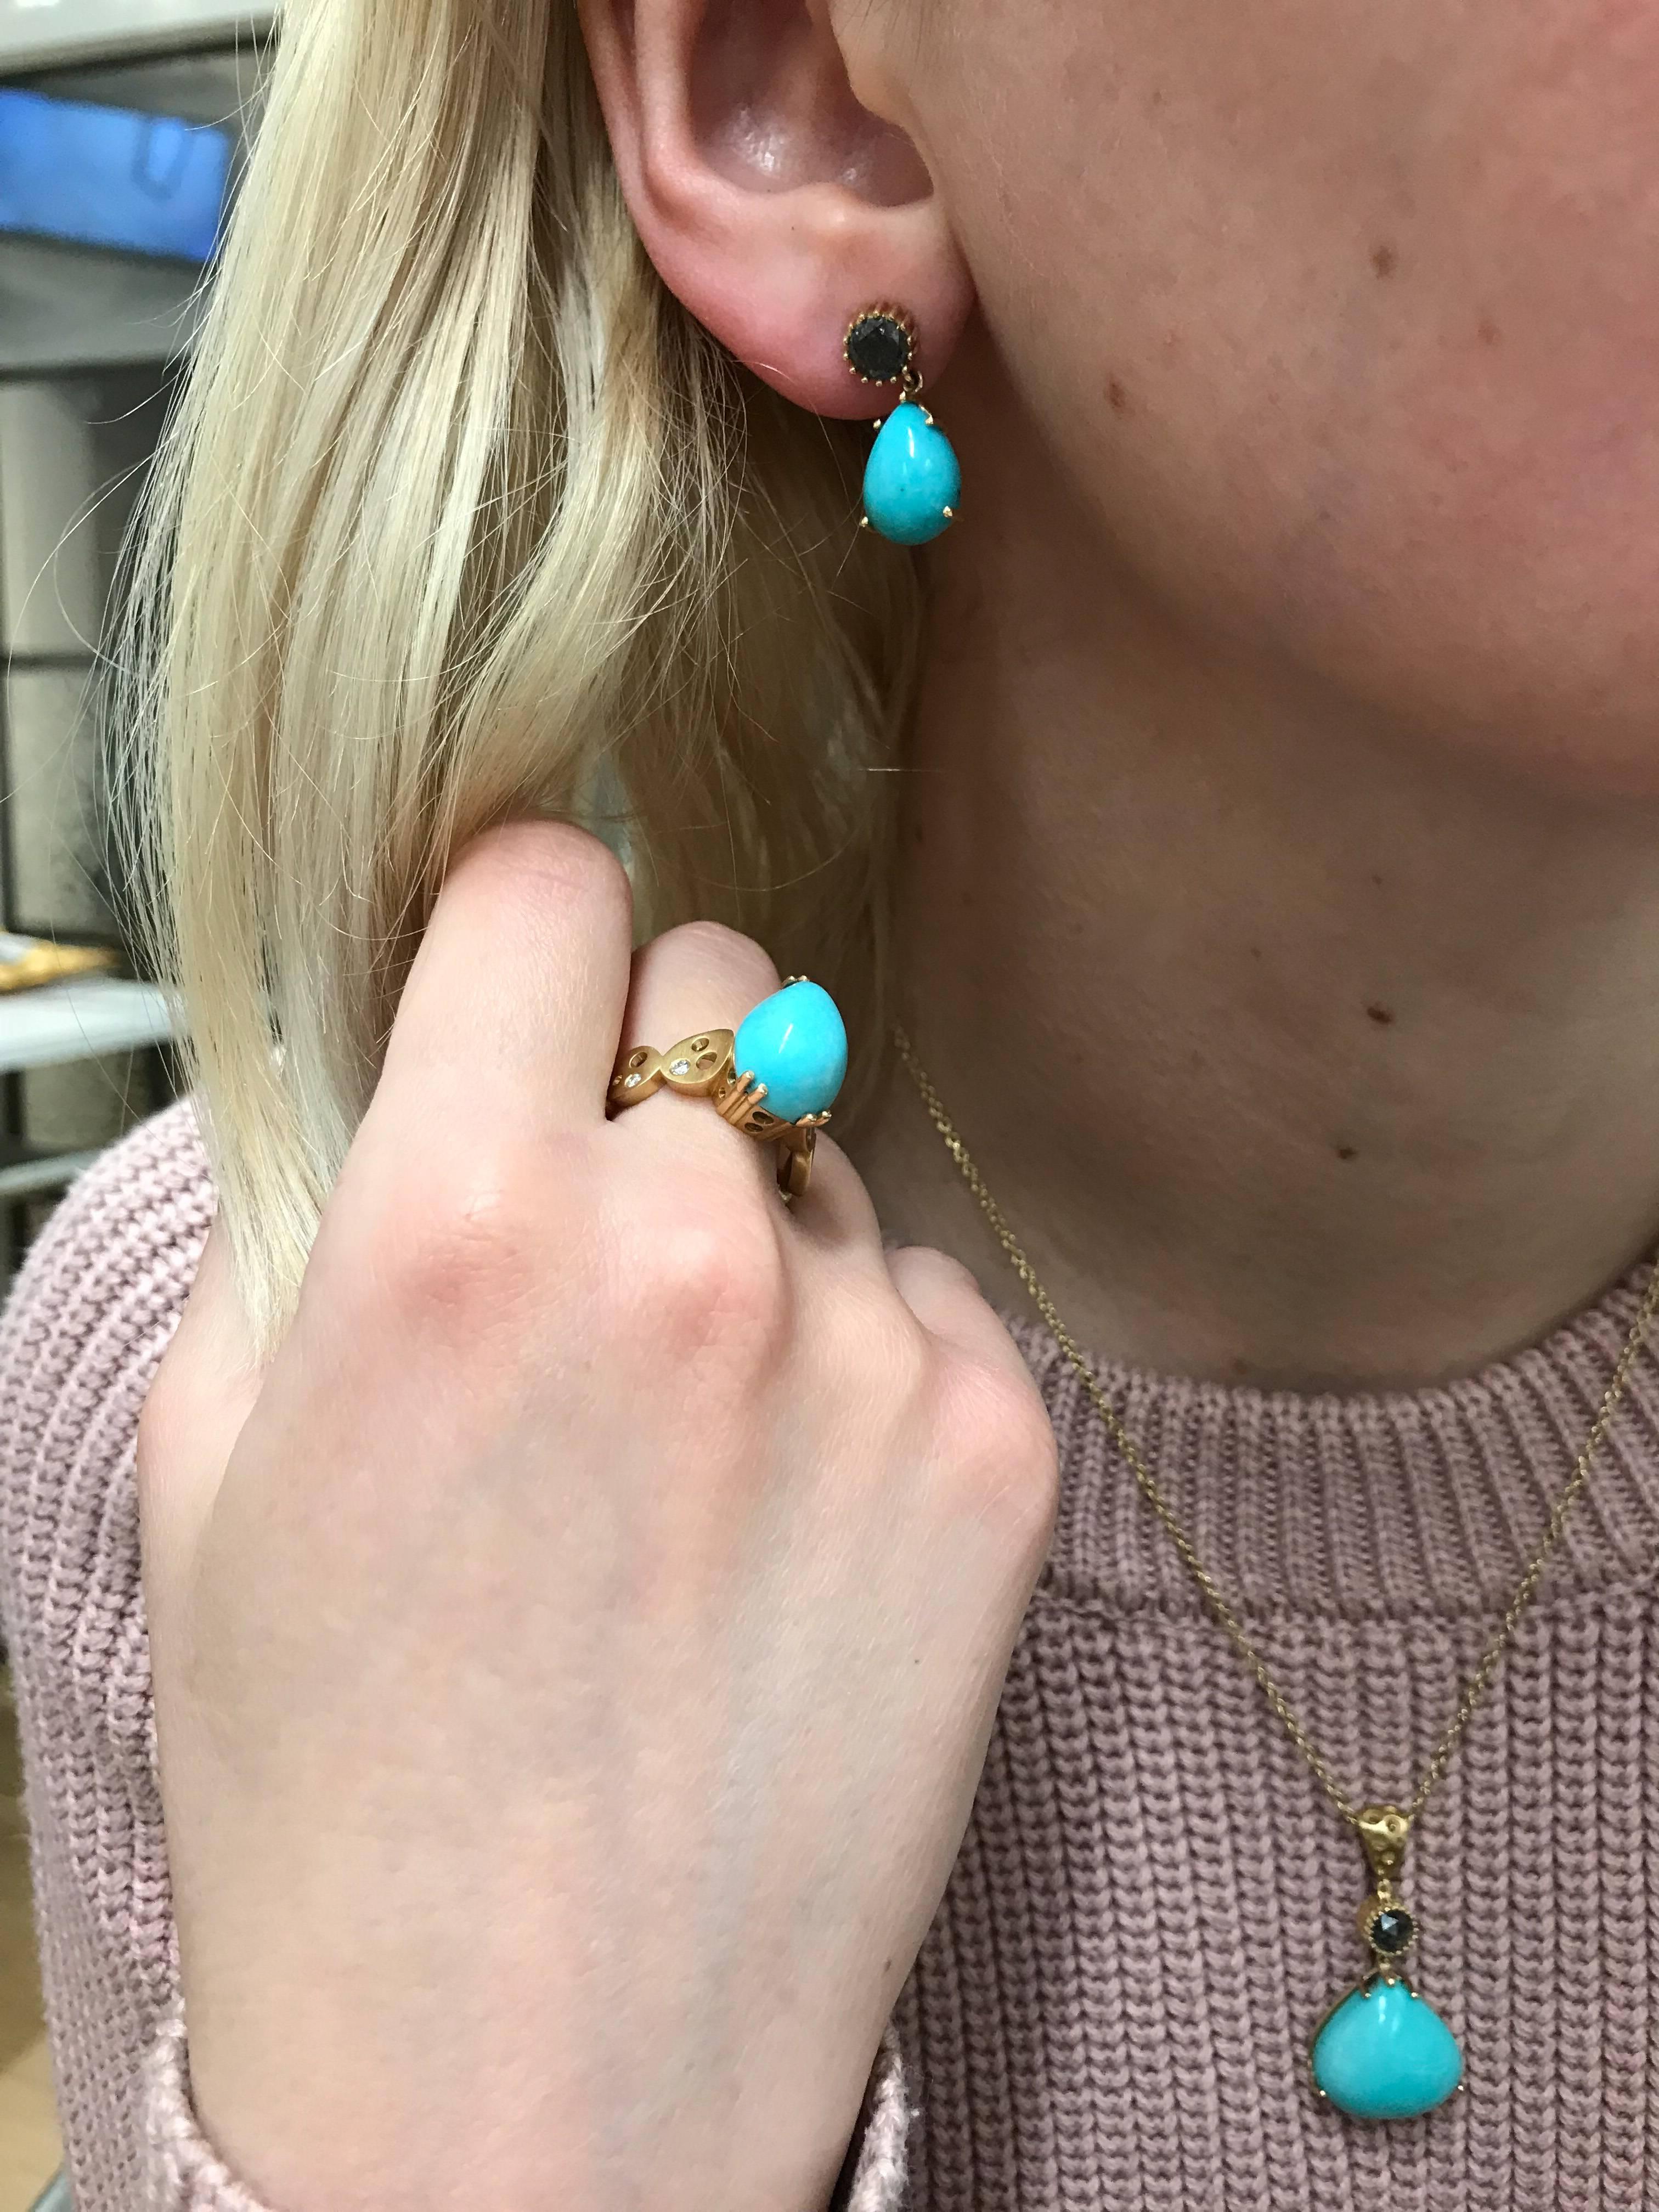 A small pear-shaped sleeping beauty turquoise (4.1 carats each) dangles from a rose cut black diamond (.72 carats each). 18 karat yellow gold prongs hug the stones in these delicate drop earrings. Small and light, they 